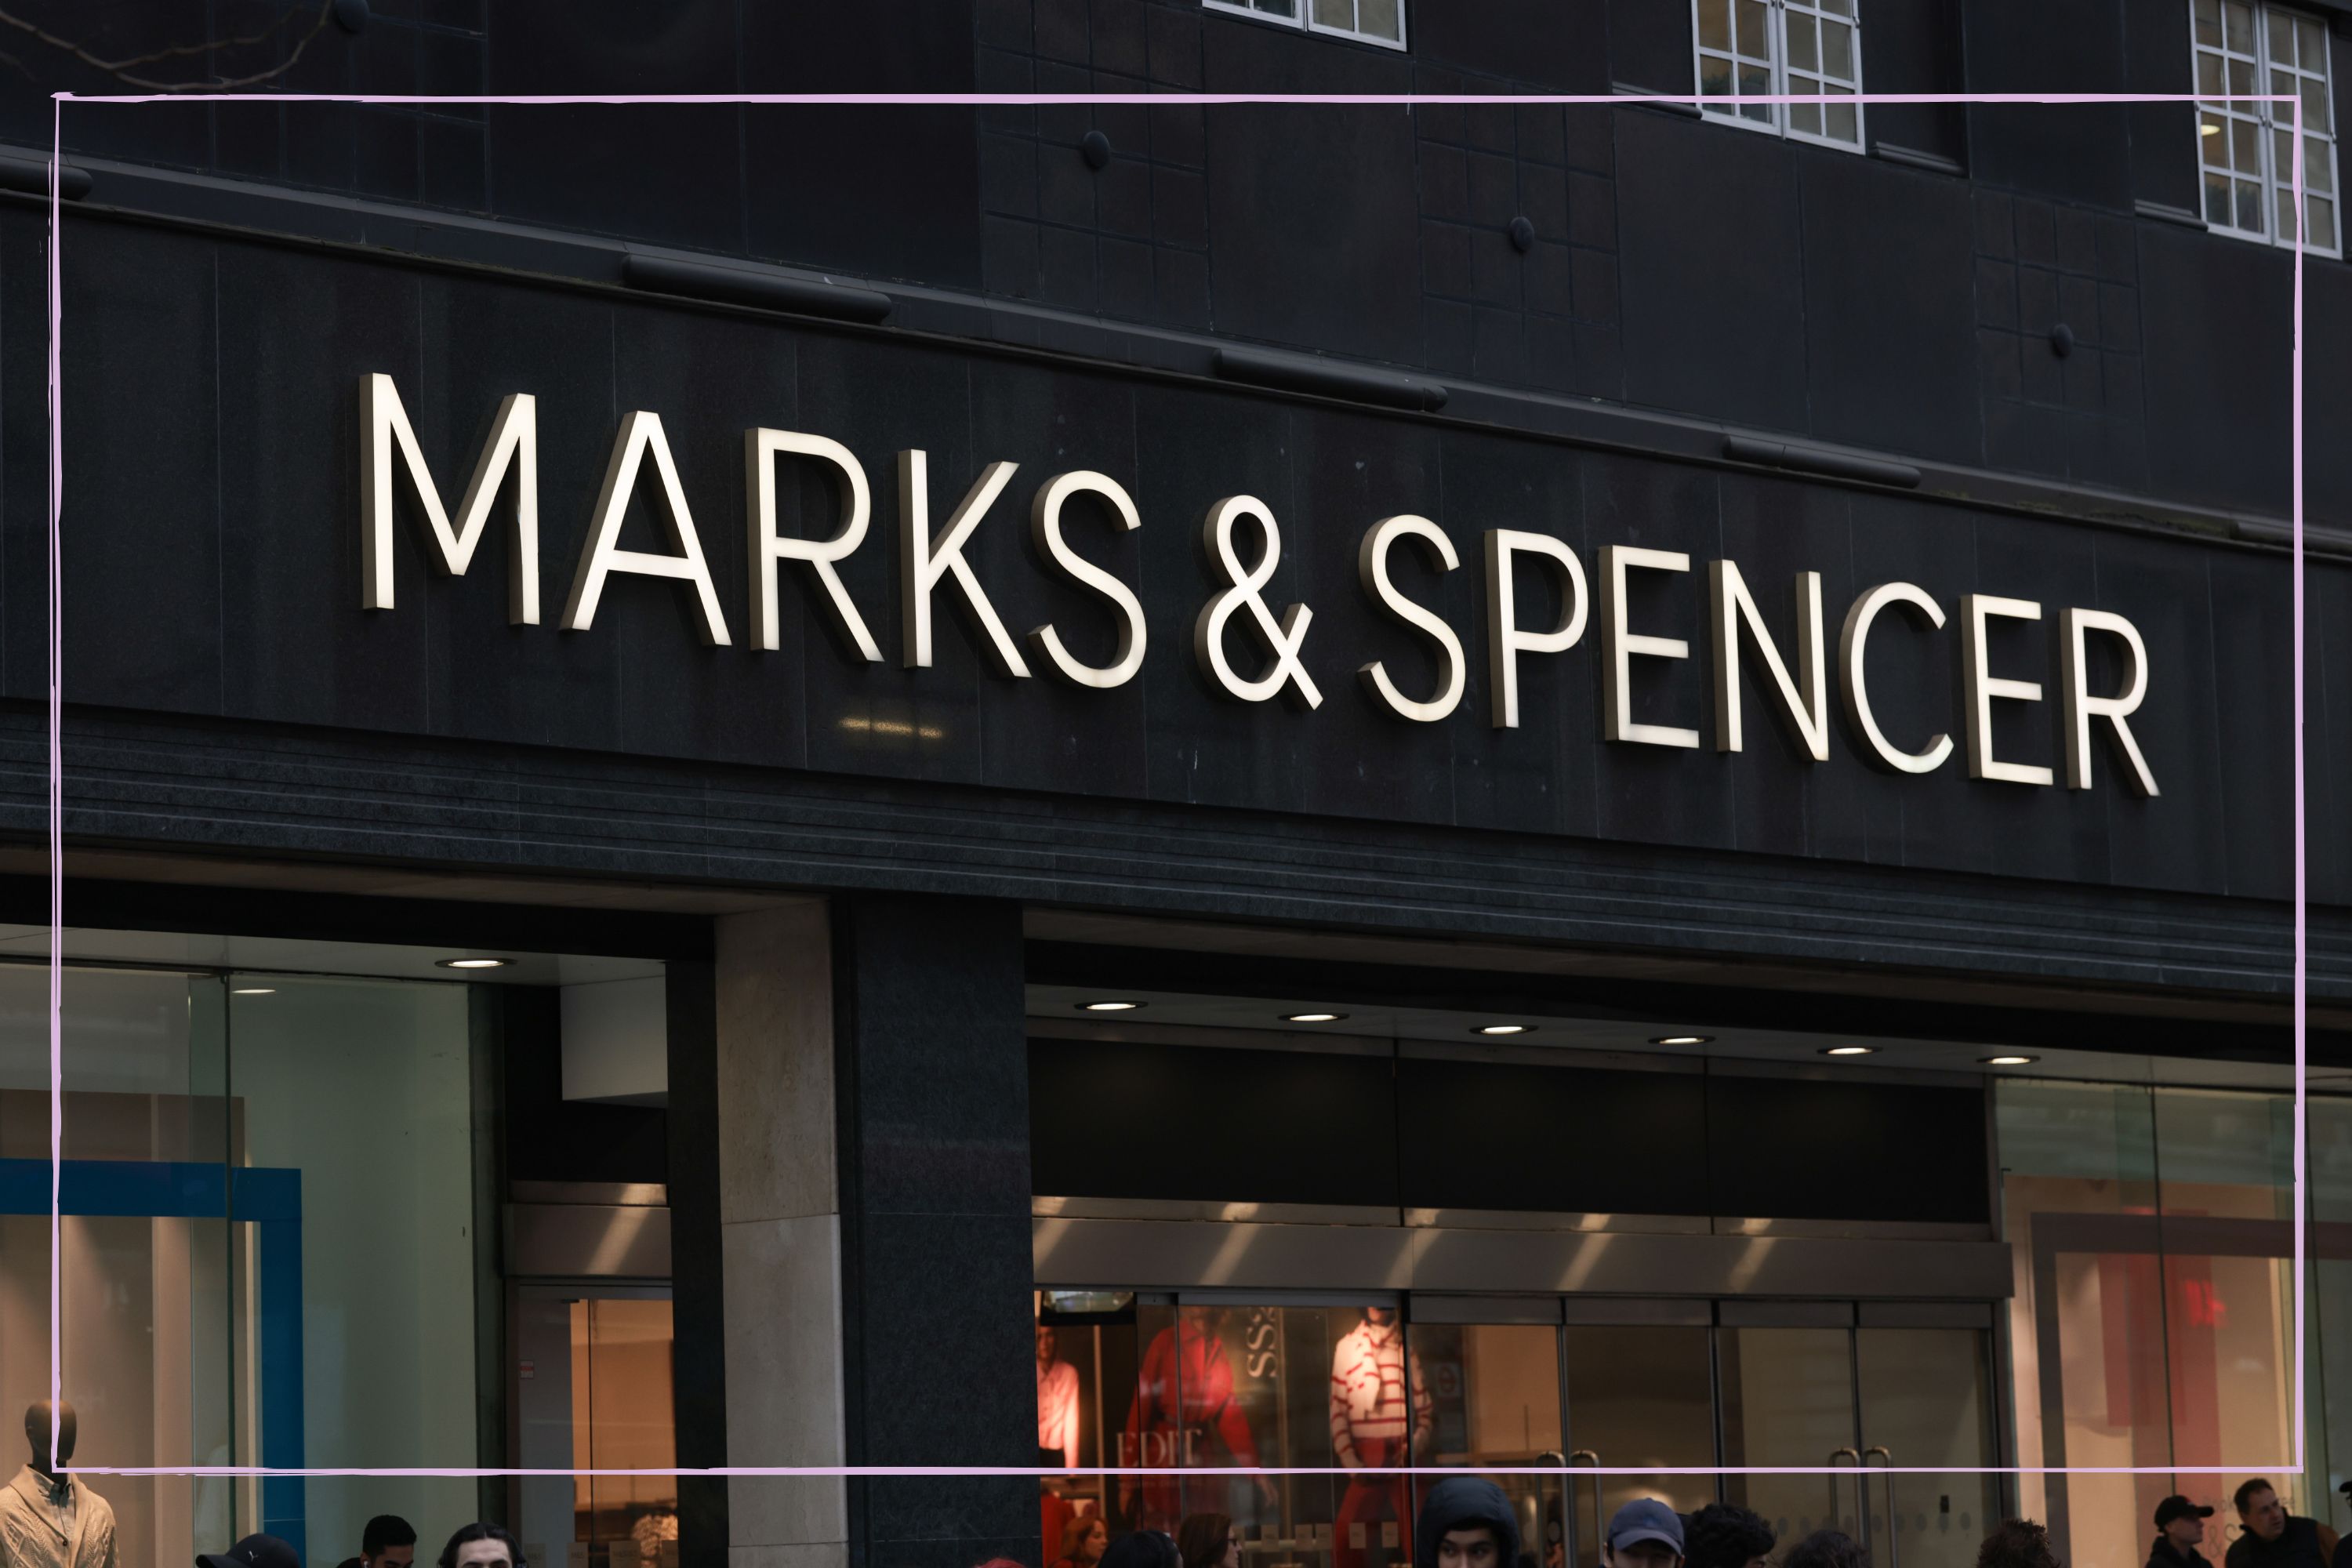 Marks & Spencer's new summer collection is here